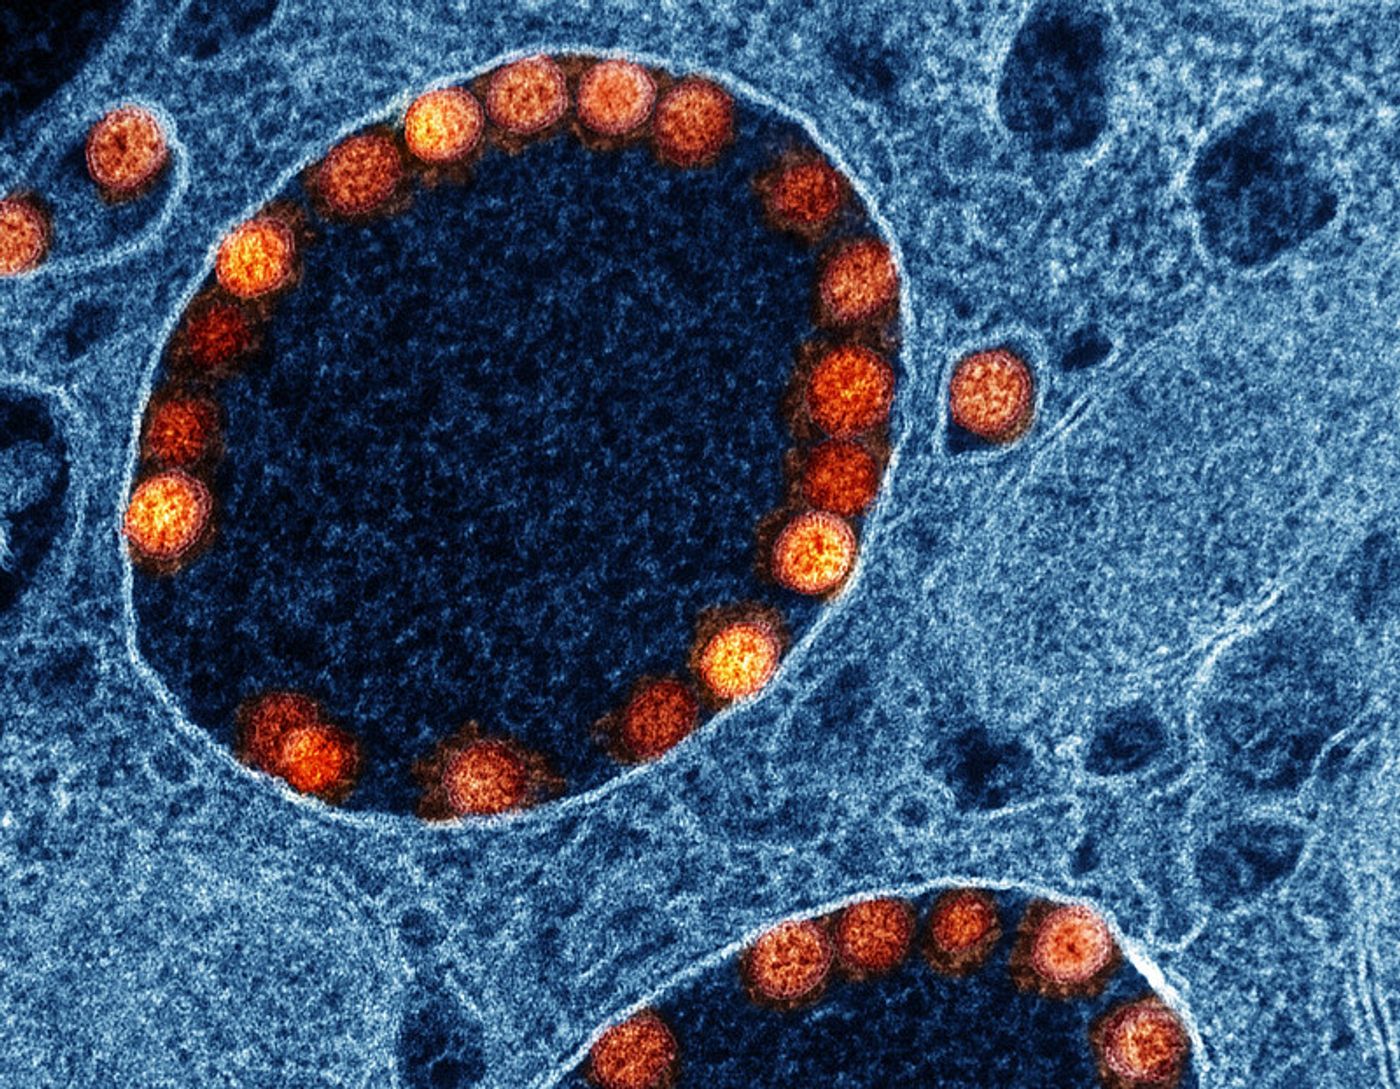 Transmission electron micrograph of SARS-CoV-2 virus particles (red/yellow) within endosomes of a heavily infected nasal olfactory epithelial cell. Image captured at the NIAID Integrated Research Facility (IRF) in Fort Detrick, Maryland. Credit: NIAID